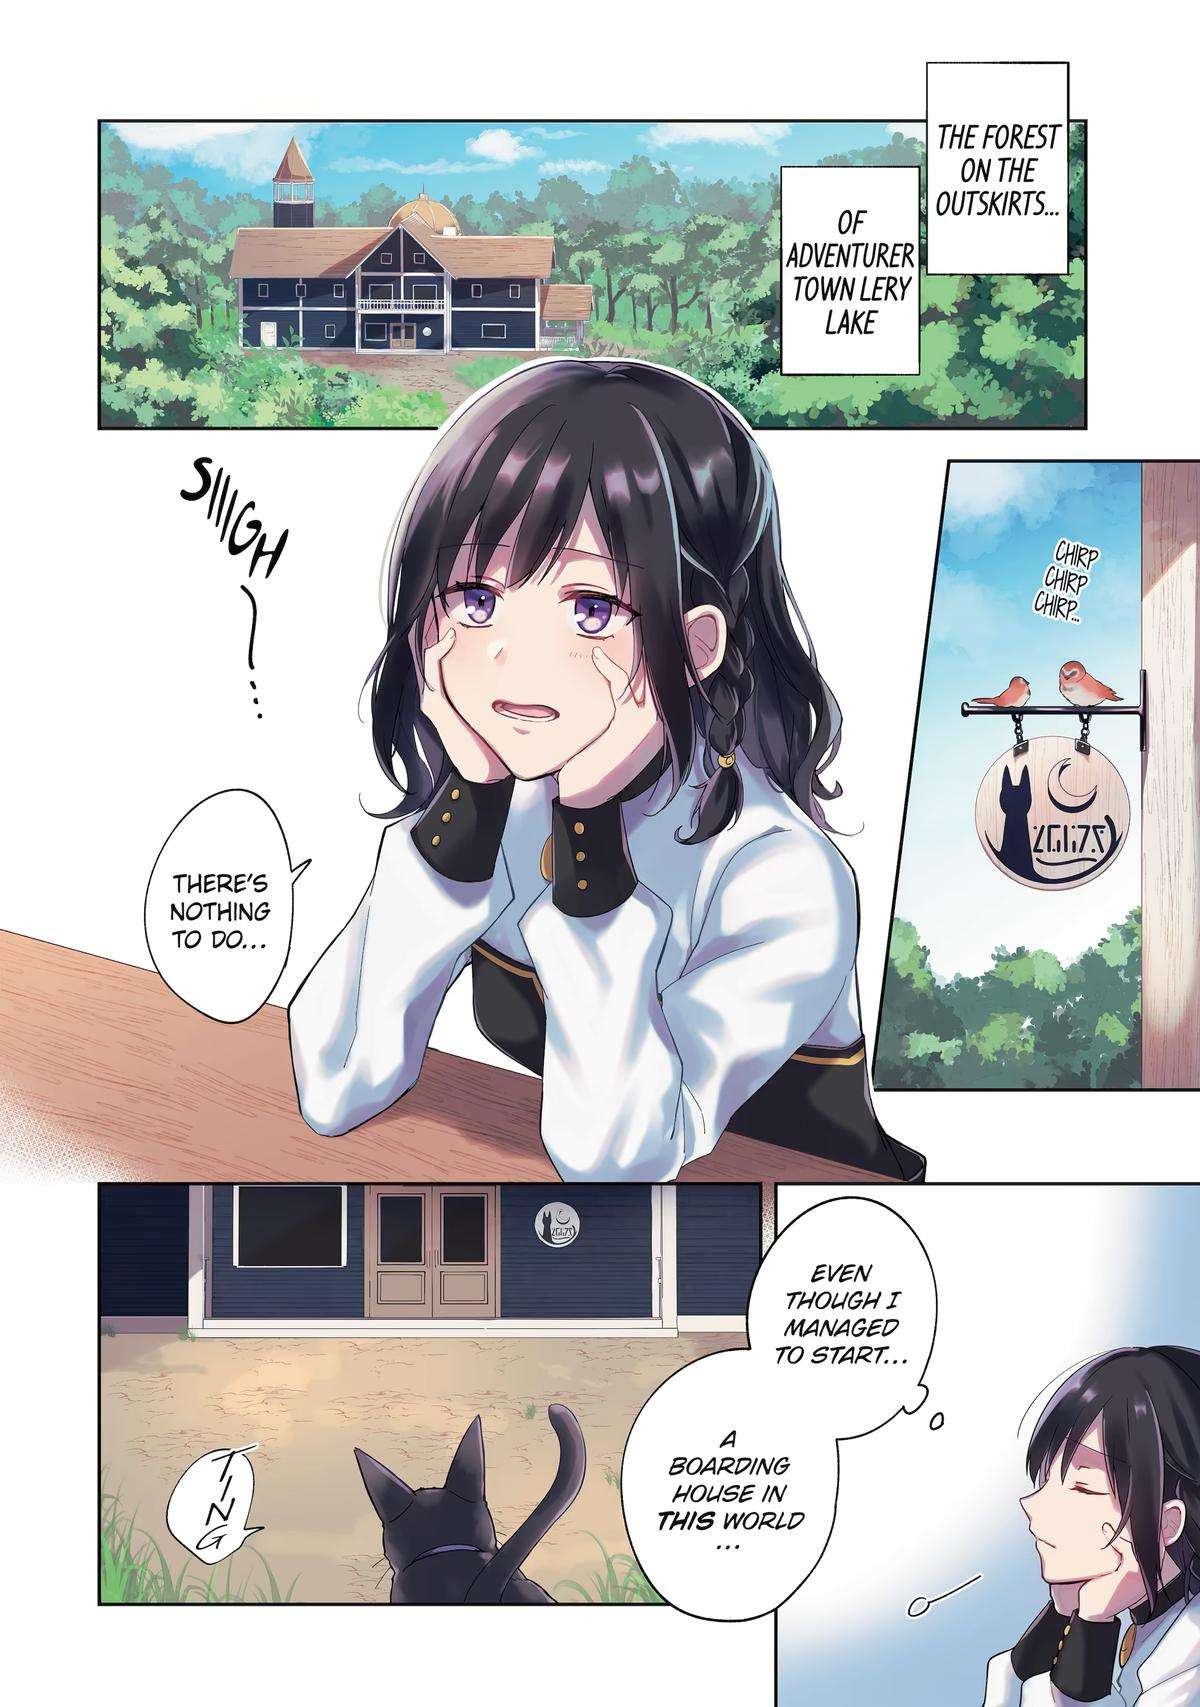 The Black Witch Runs Her Own Boarding House in Another World - chapter 1 - #3